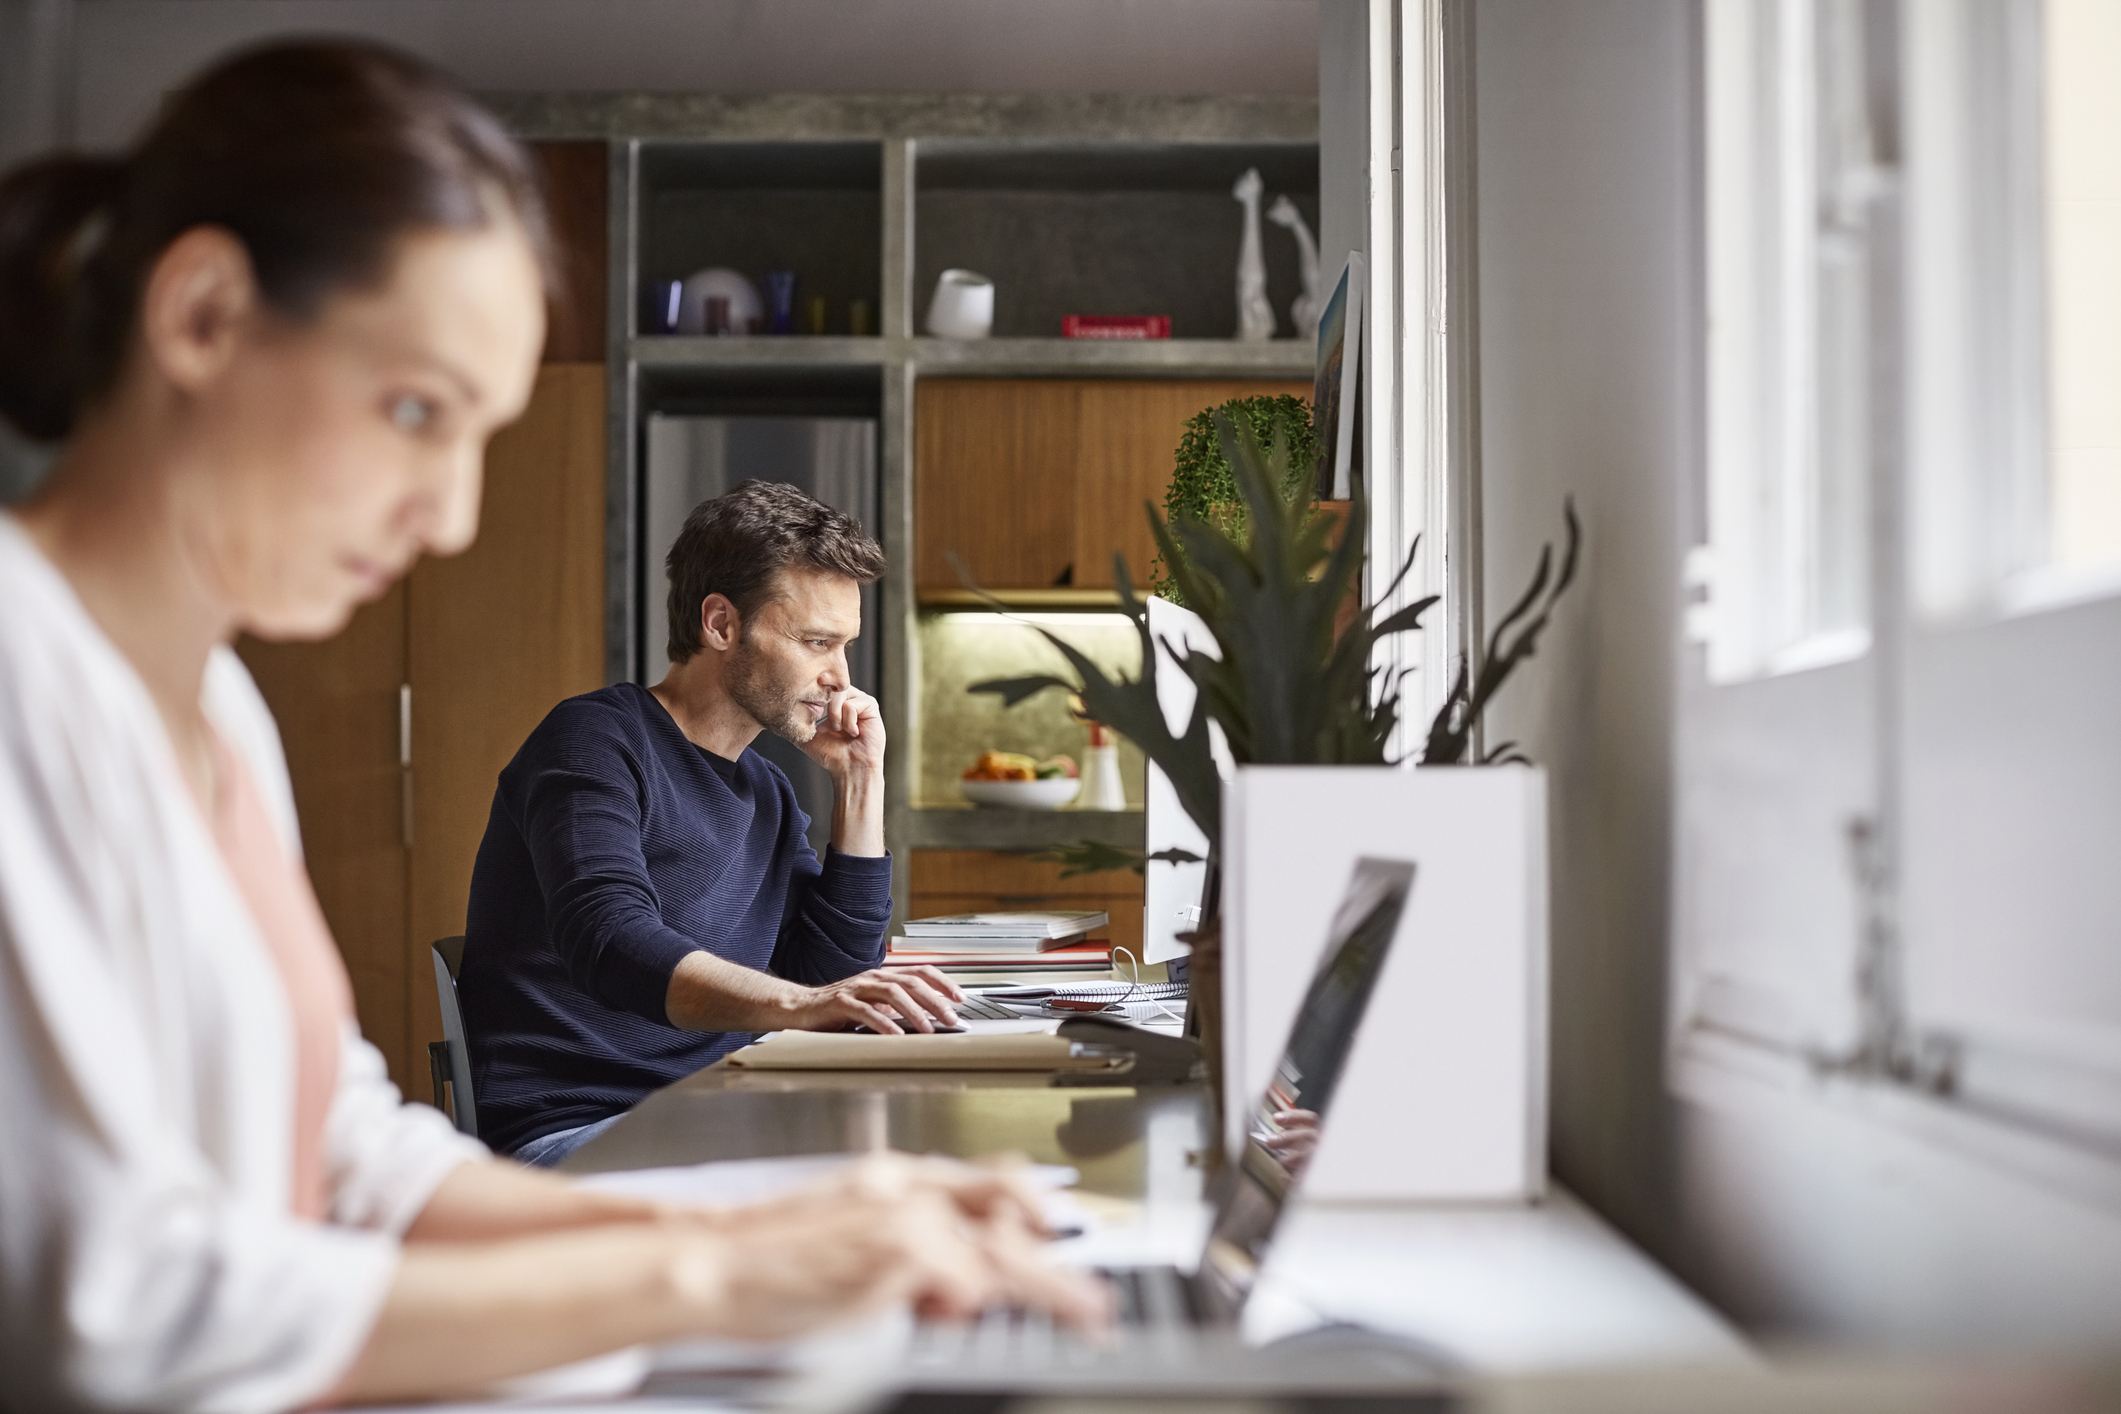 Couples working from home have often had greater access to each other's information. Some have been unable to resist turning it to their advantage. Credit:	Morsa Images/Getty